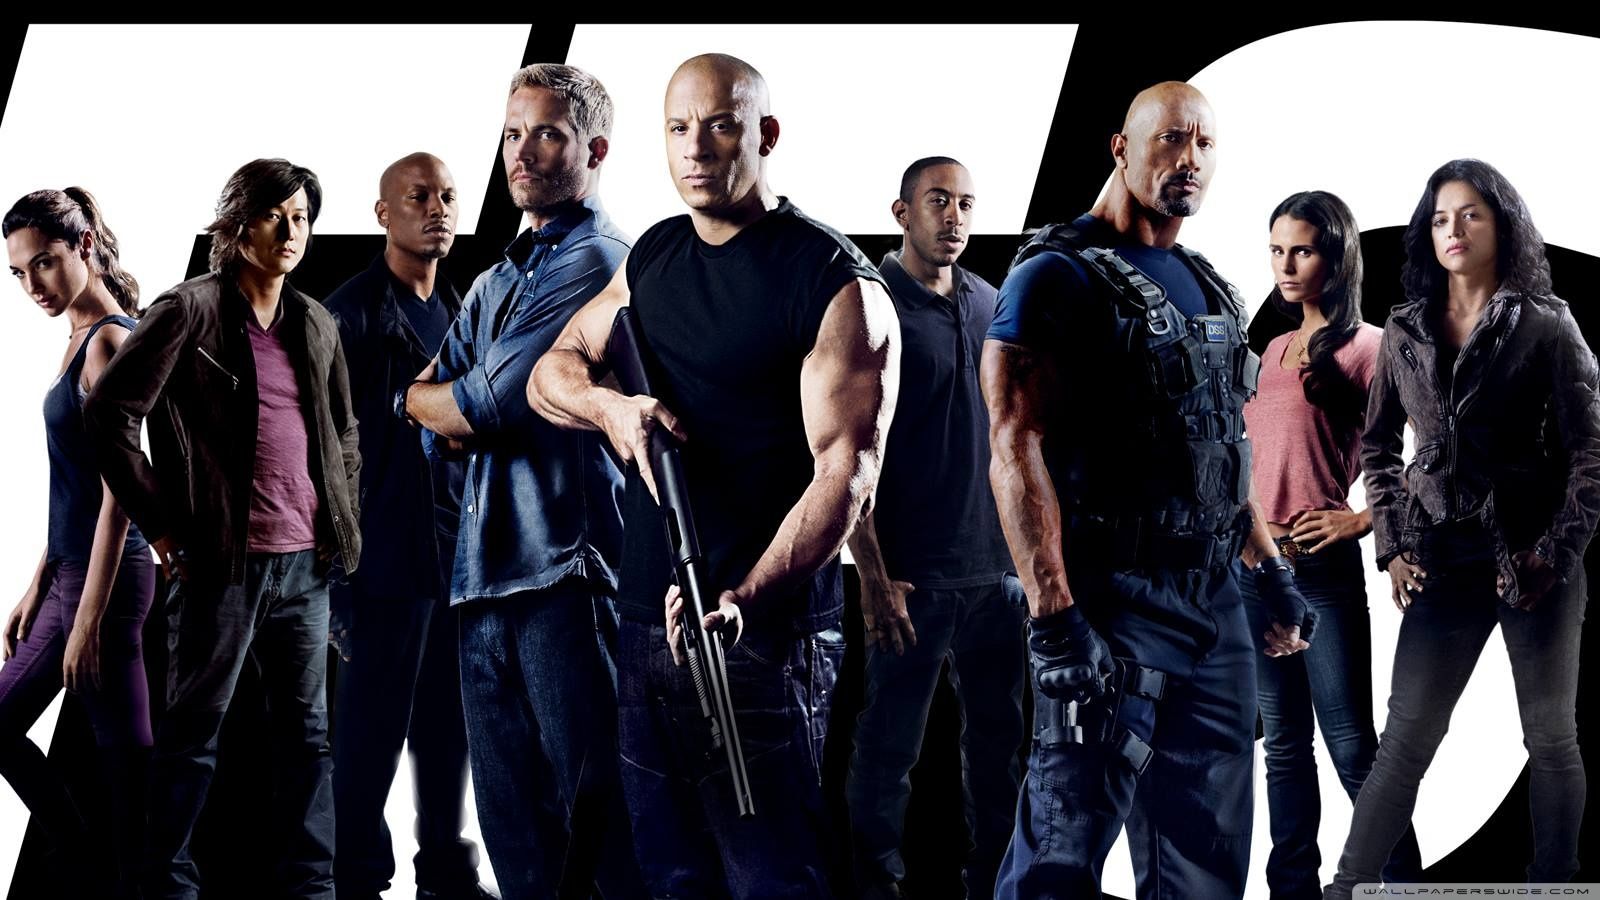 Fast & Furious 7 Windows 8.1 Theme and Wallpaper | All for Windows ...